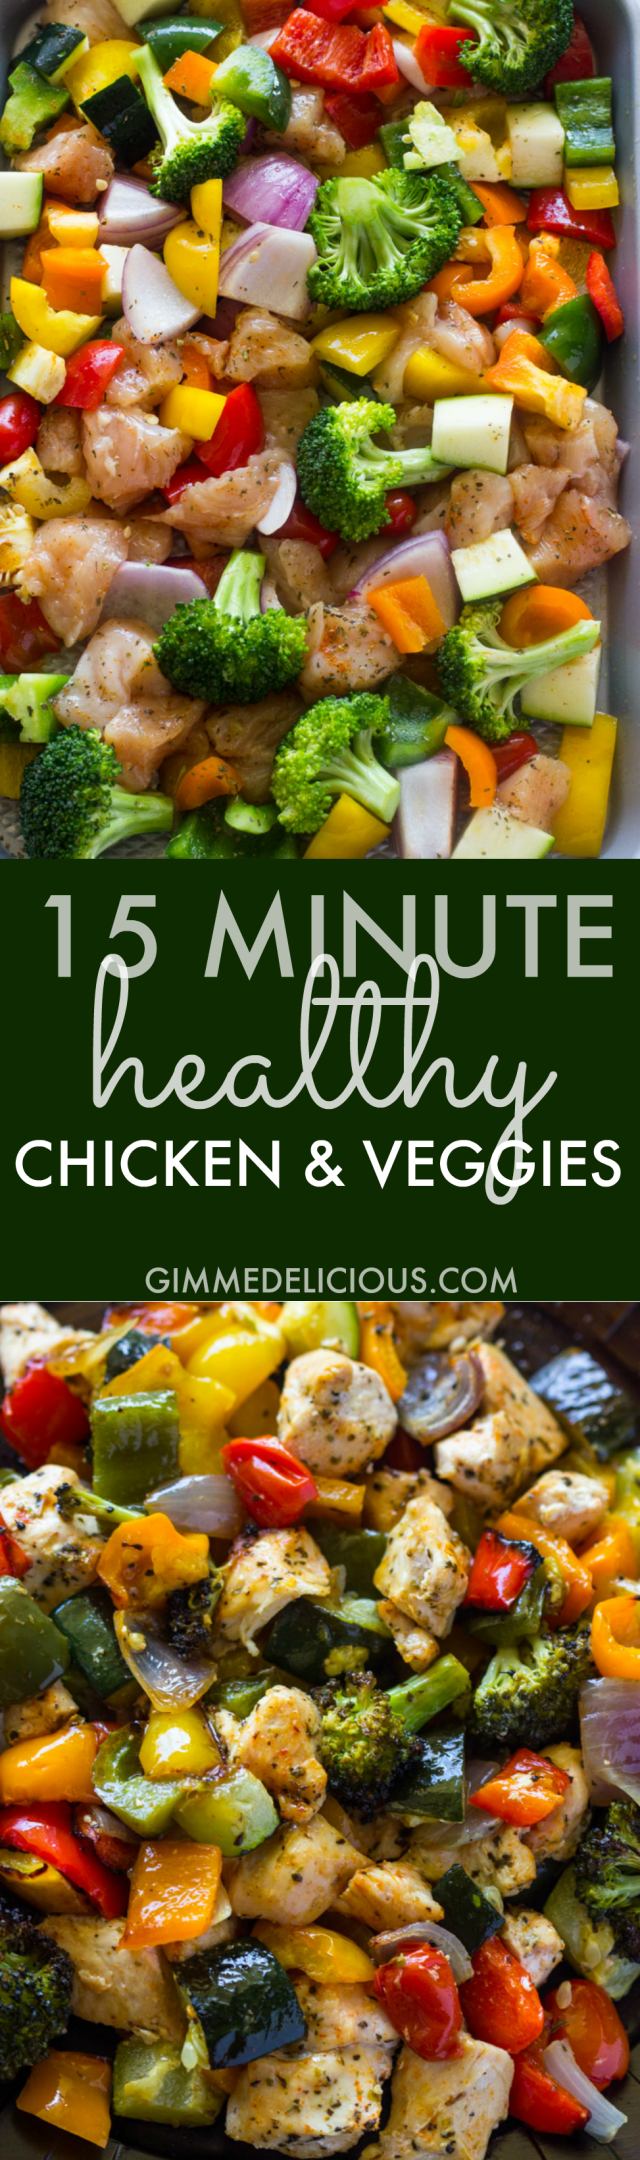 15 Minute Healthy Roasted Chicken and Veggies (Video) | Gimme Delicious